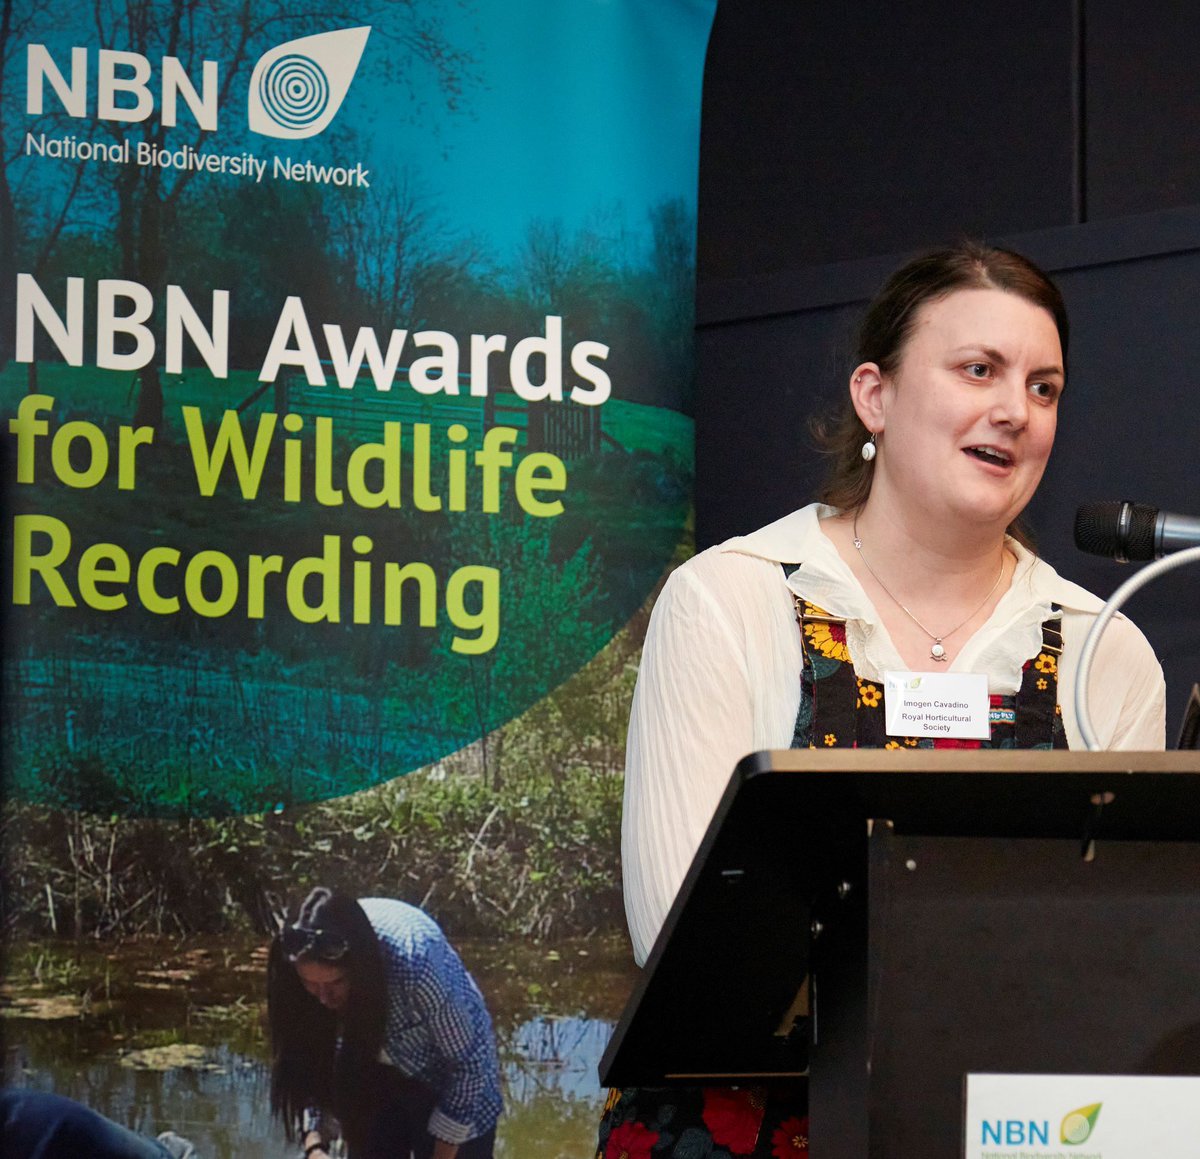 Just one more day to nominate exceptional groups or individuals for the @NBNTrust NBN Award for Marine Wildlife Recording 2024! Entries close on the 3 April 2024, see link for details 👇 buff.ly/3TCek2D #MakingDataWorkForNature #NBNawards24